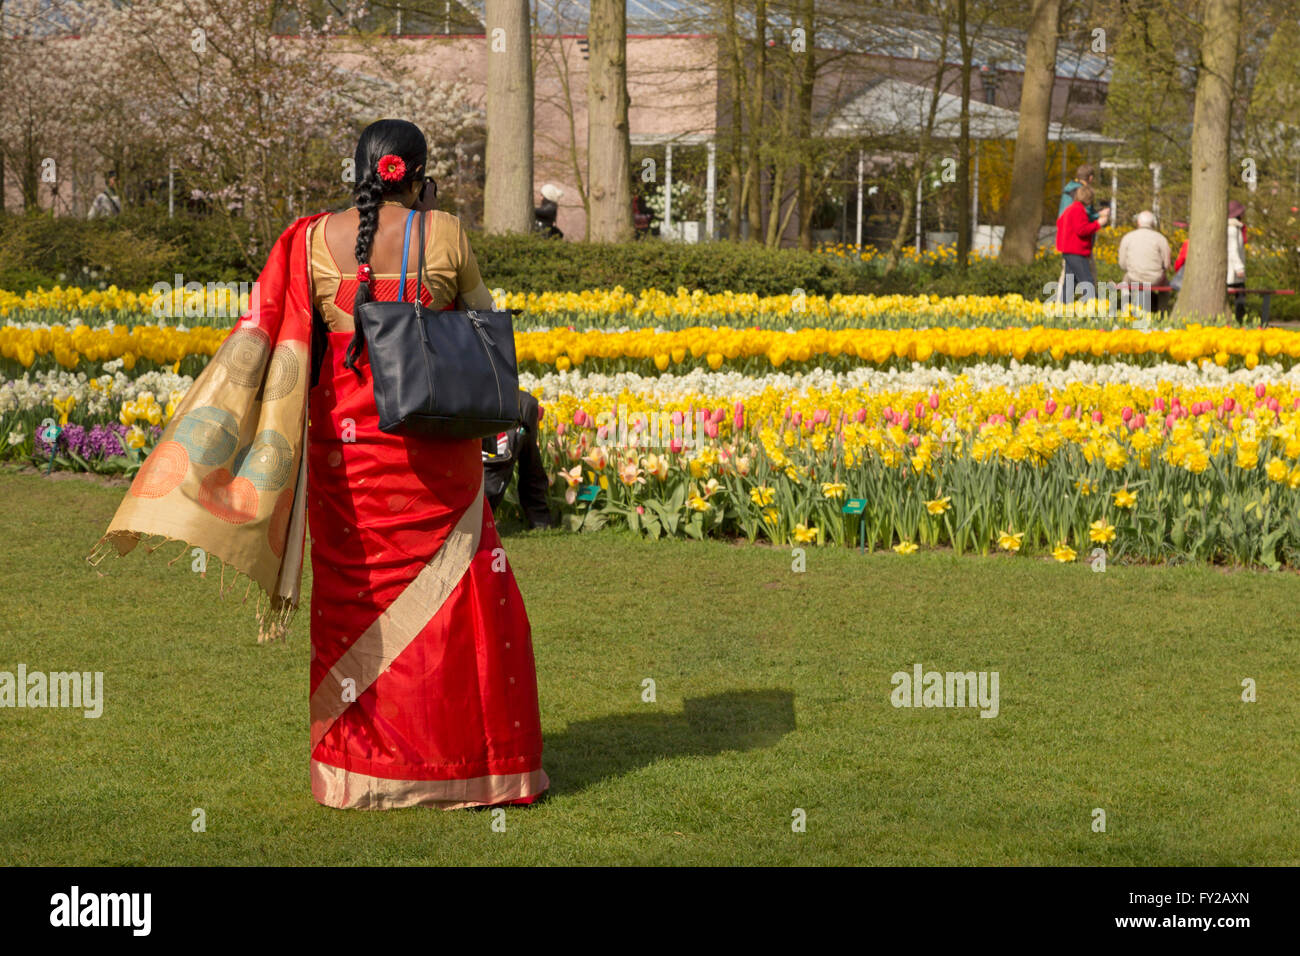 Multicultural visitor at the famous Keukenhof, one of the world's largest flower gardens, Lisse, South Holland, Netherlands. Stock Photo